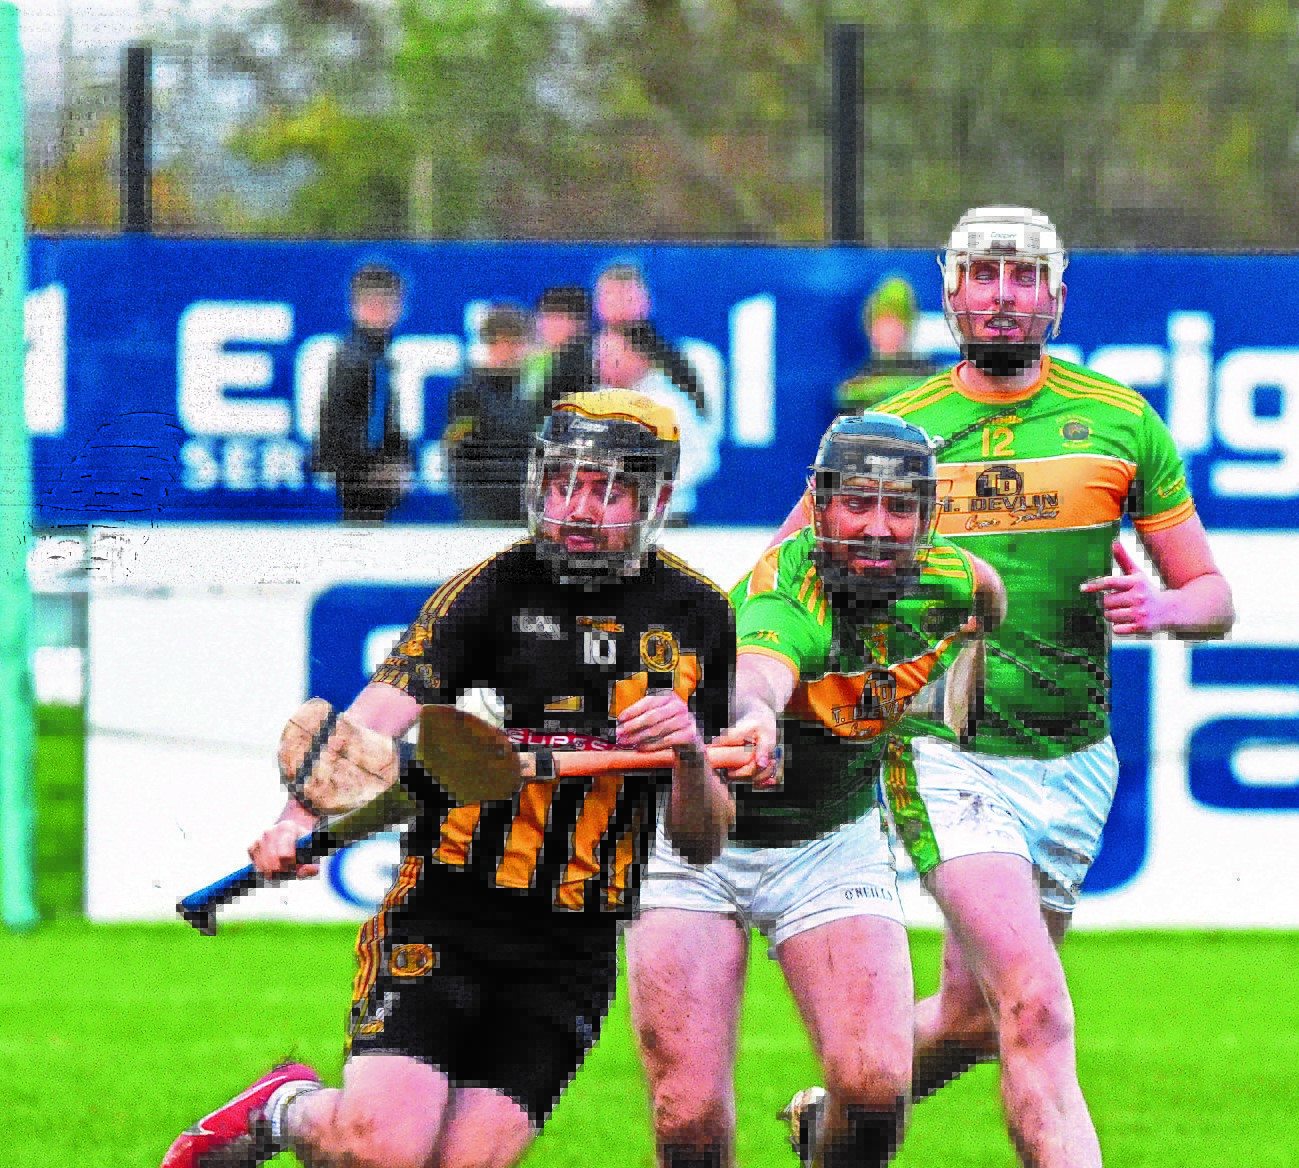 Football clubs in Tyrone should promote hurling